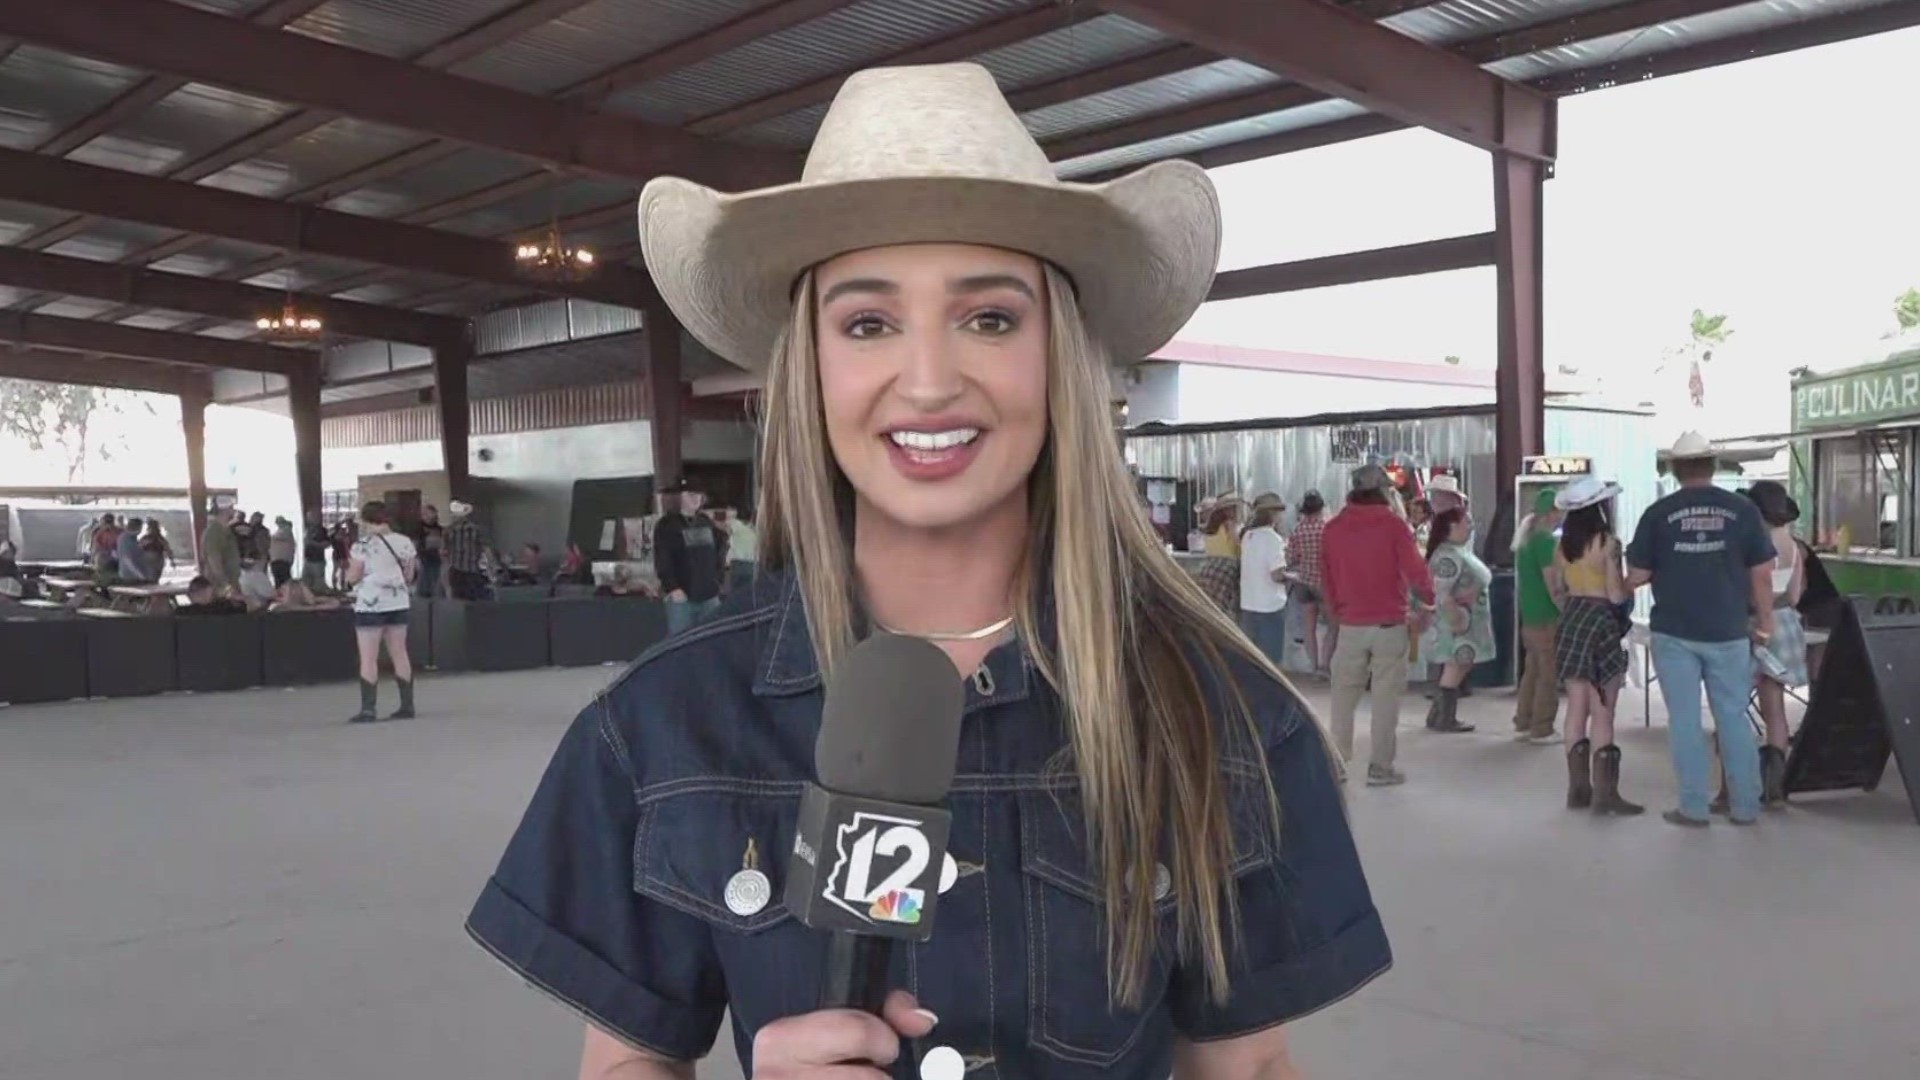 Night one of the popular country music festival kicked off in Arizona on Thursday where concert-goers can adopt a dog or get a plethora of tap beers.